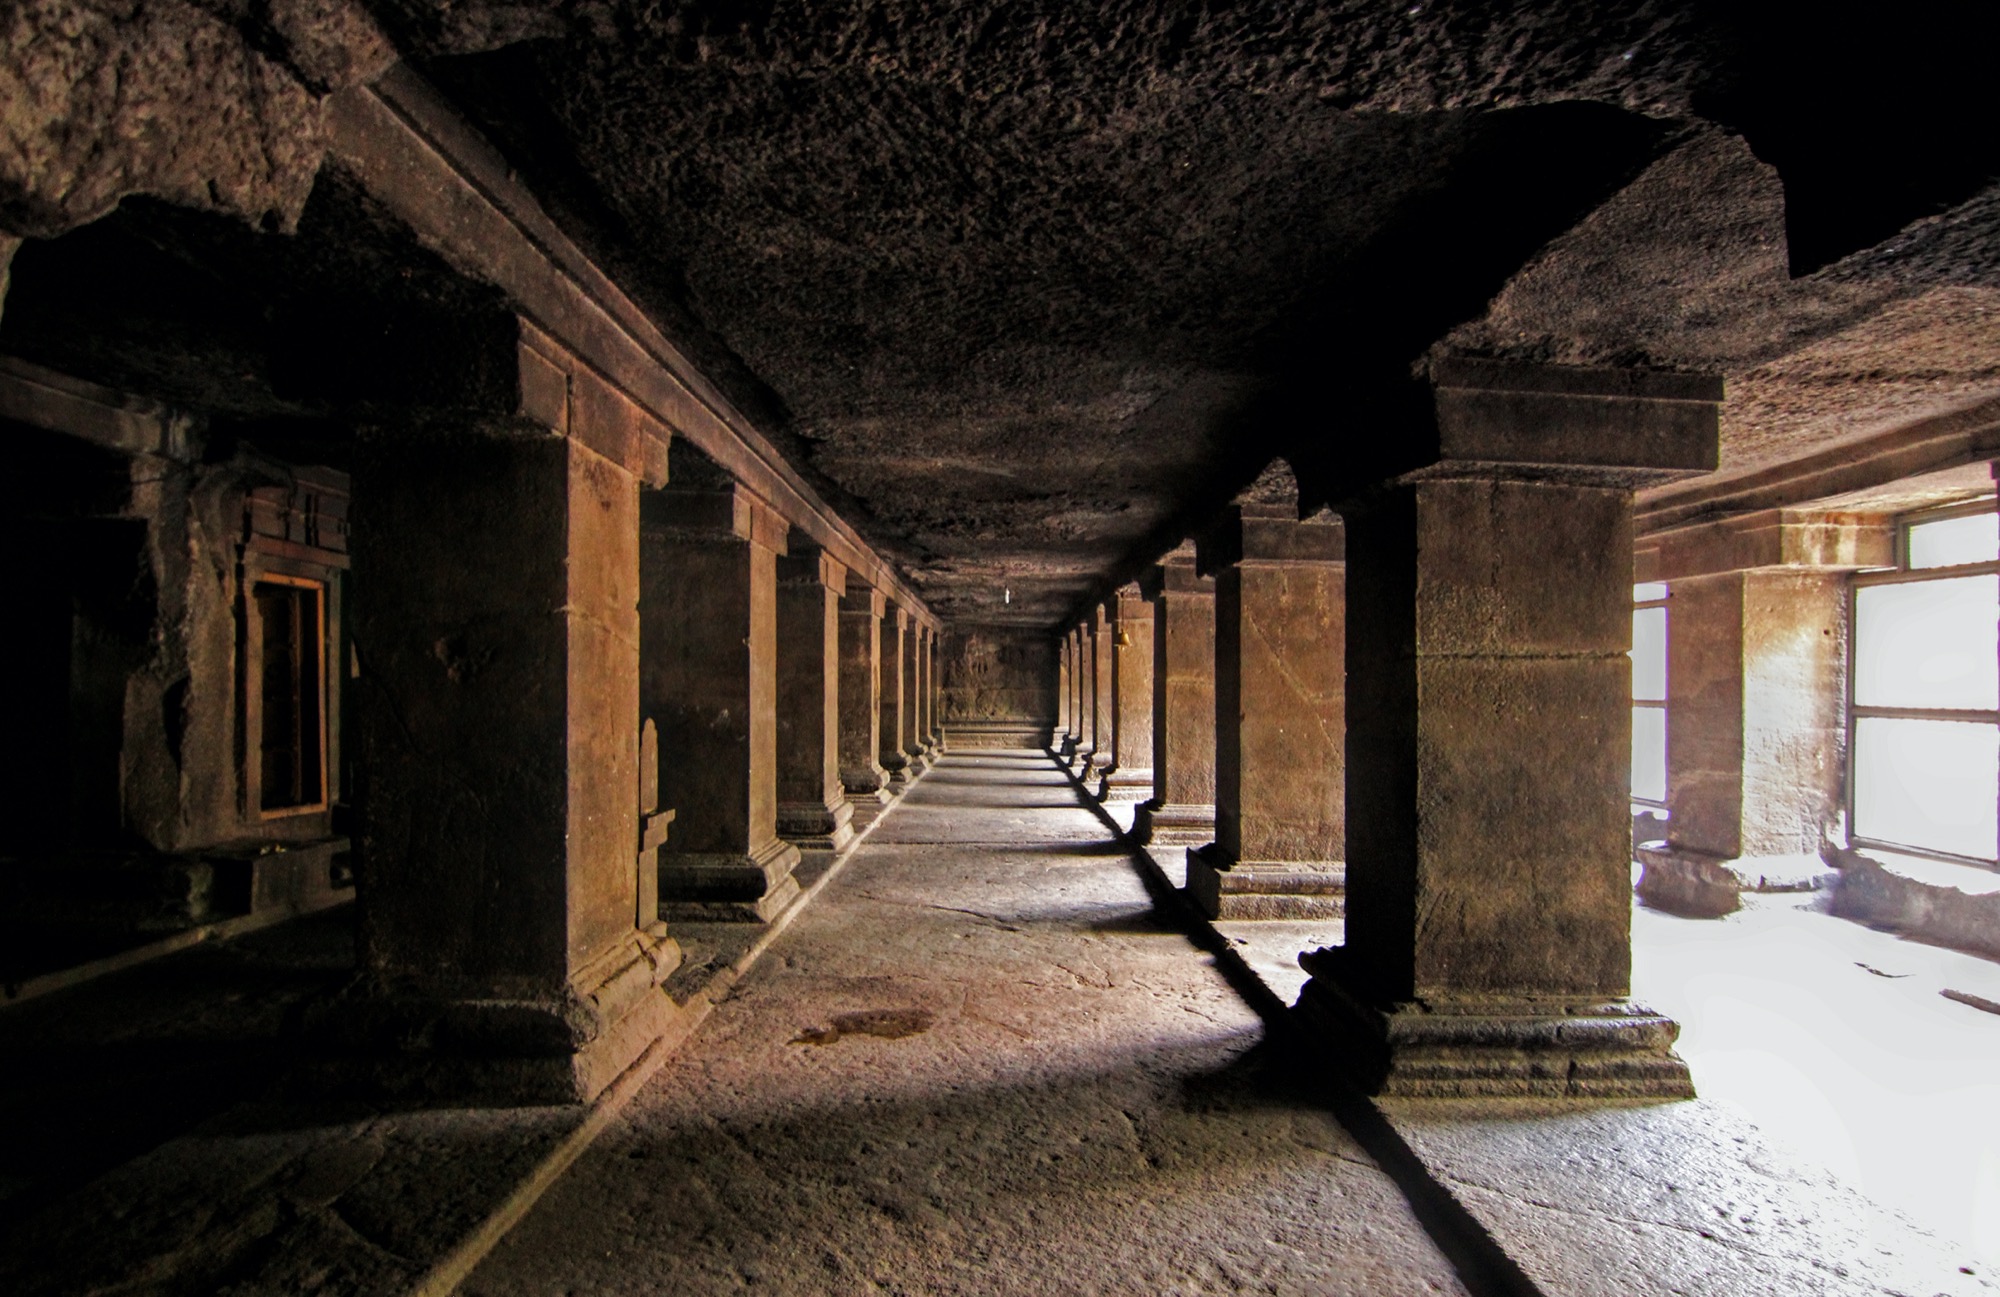 Pataleshwar caves - Pune’s hip underground meet-up place since a cool 1300 years! 10